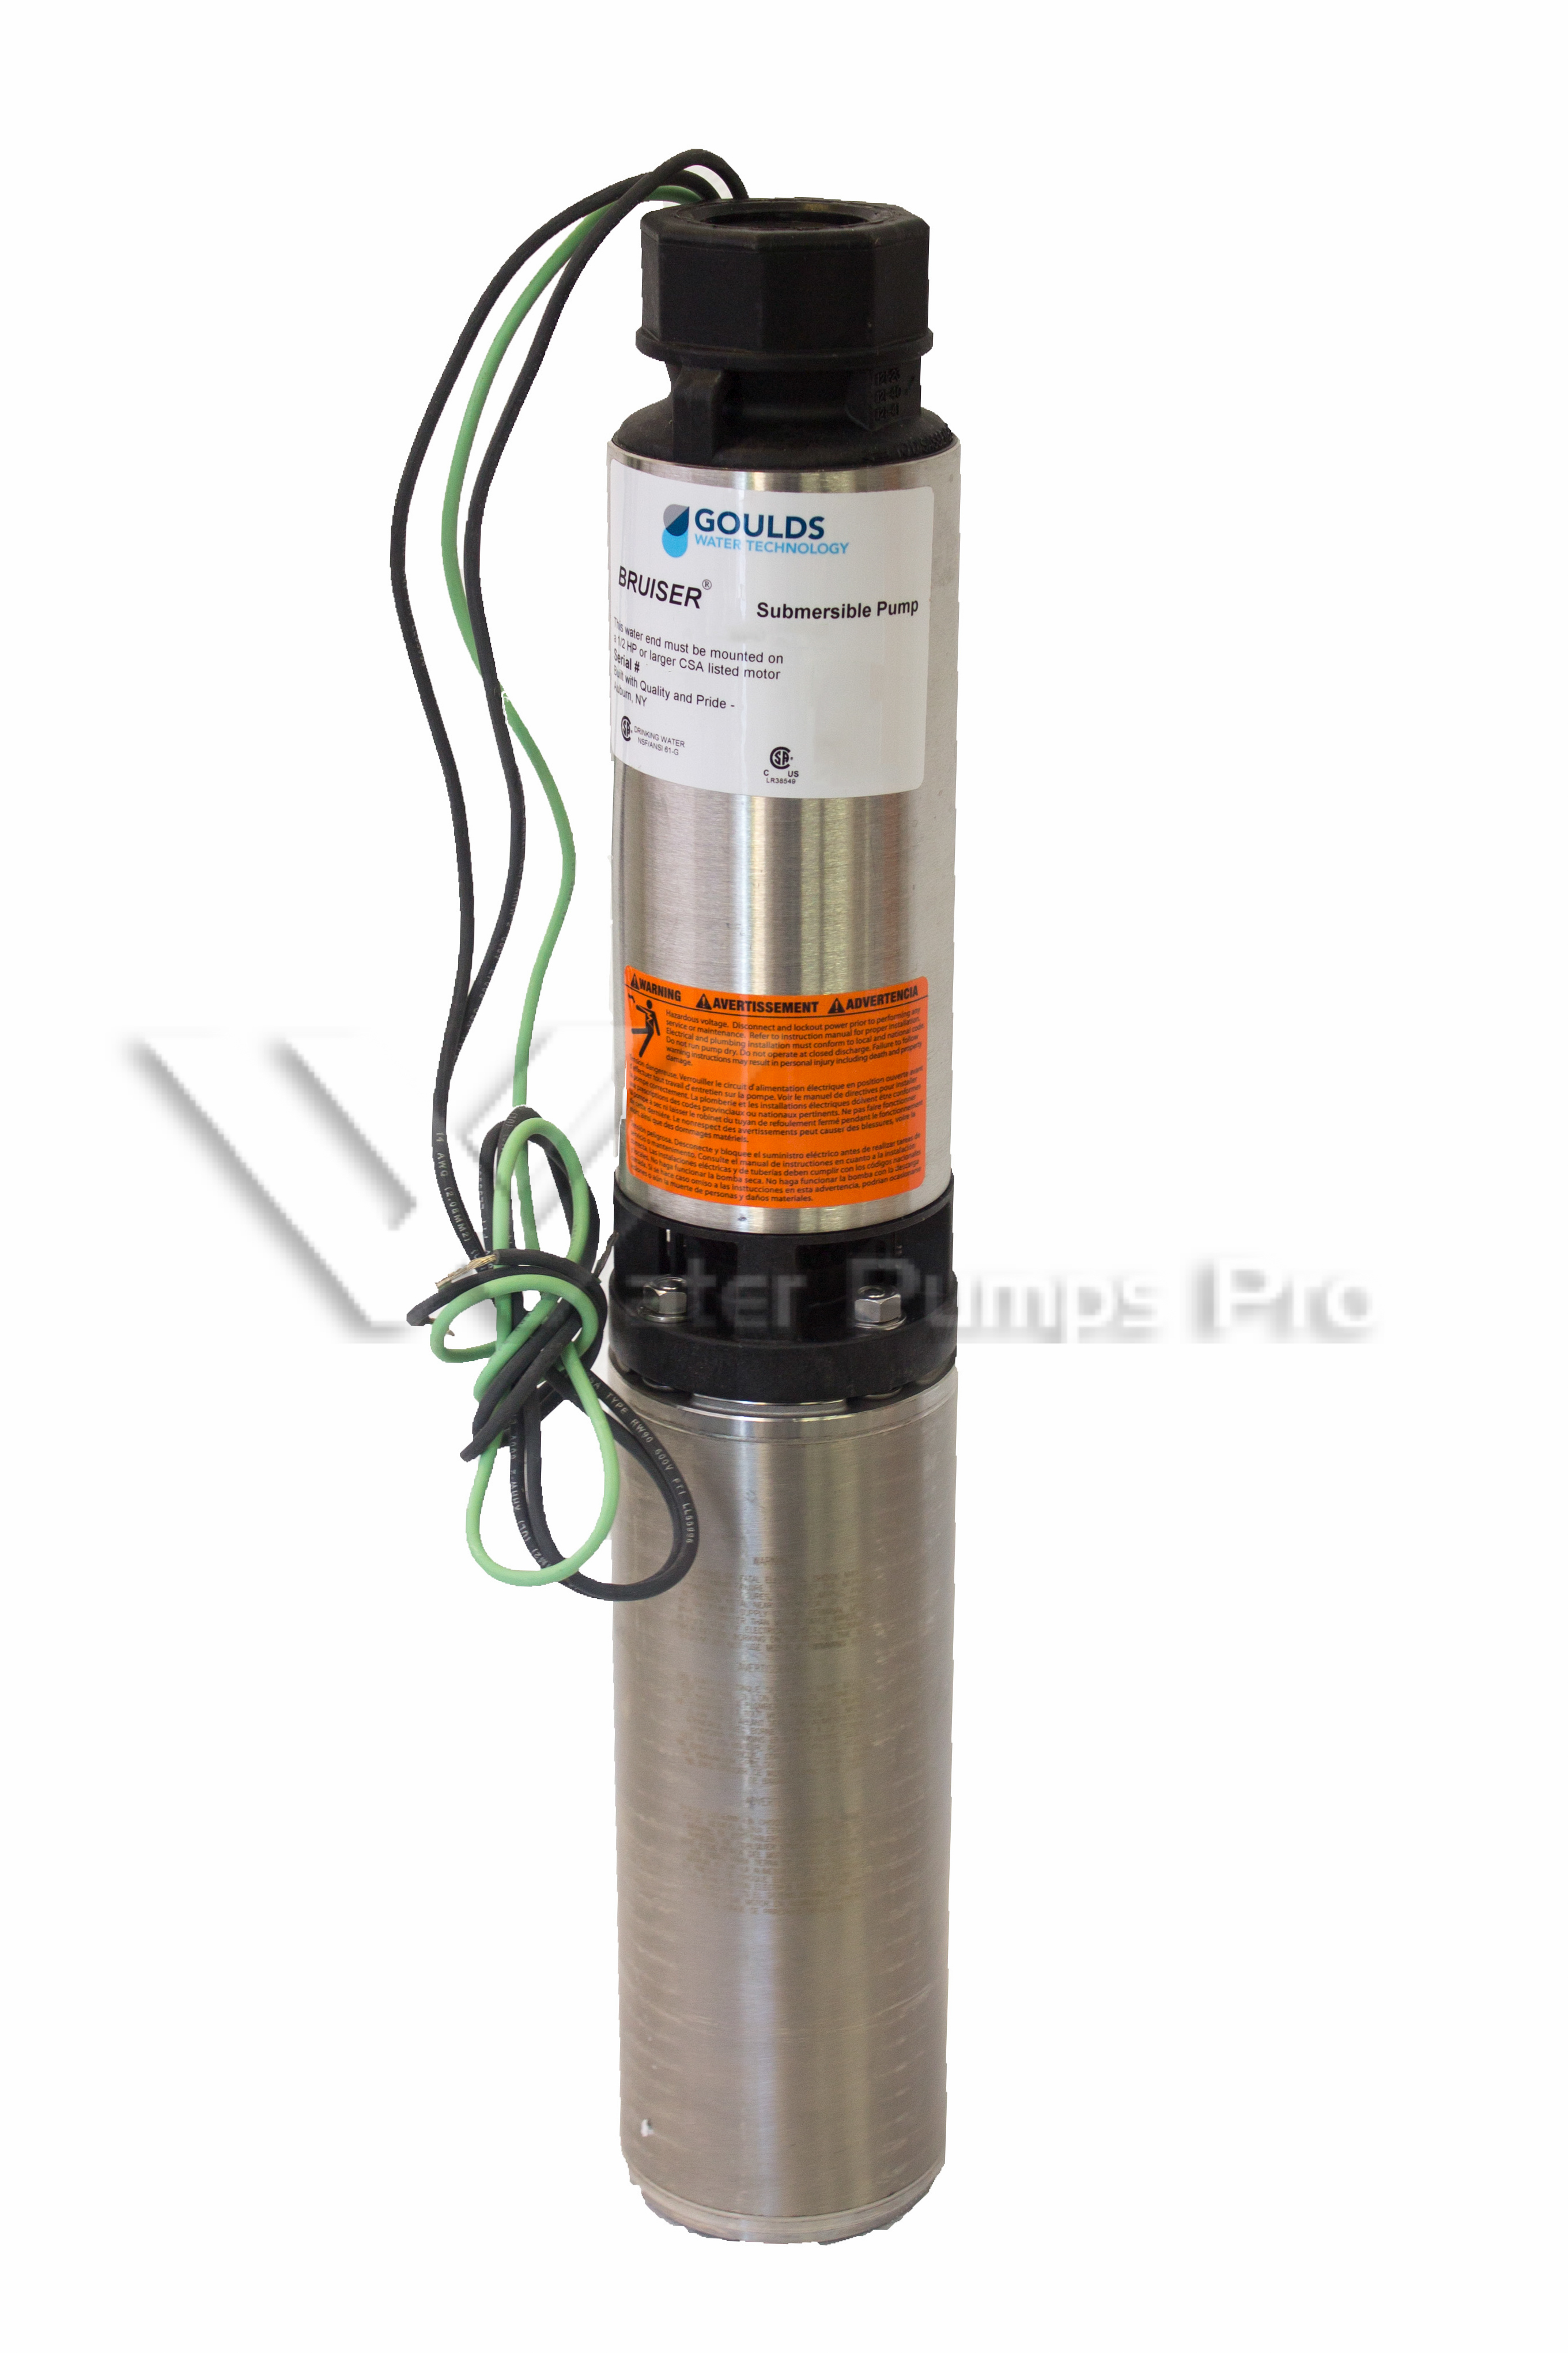 Goulds 10SB07422C 10GMP 3/4HP 230V Submersible Water Well Pump